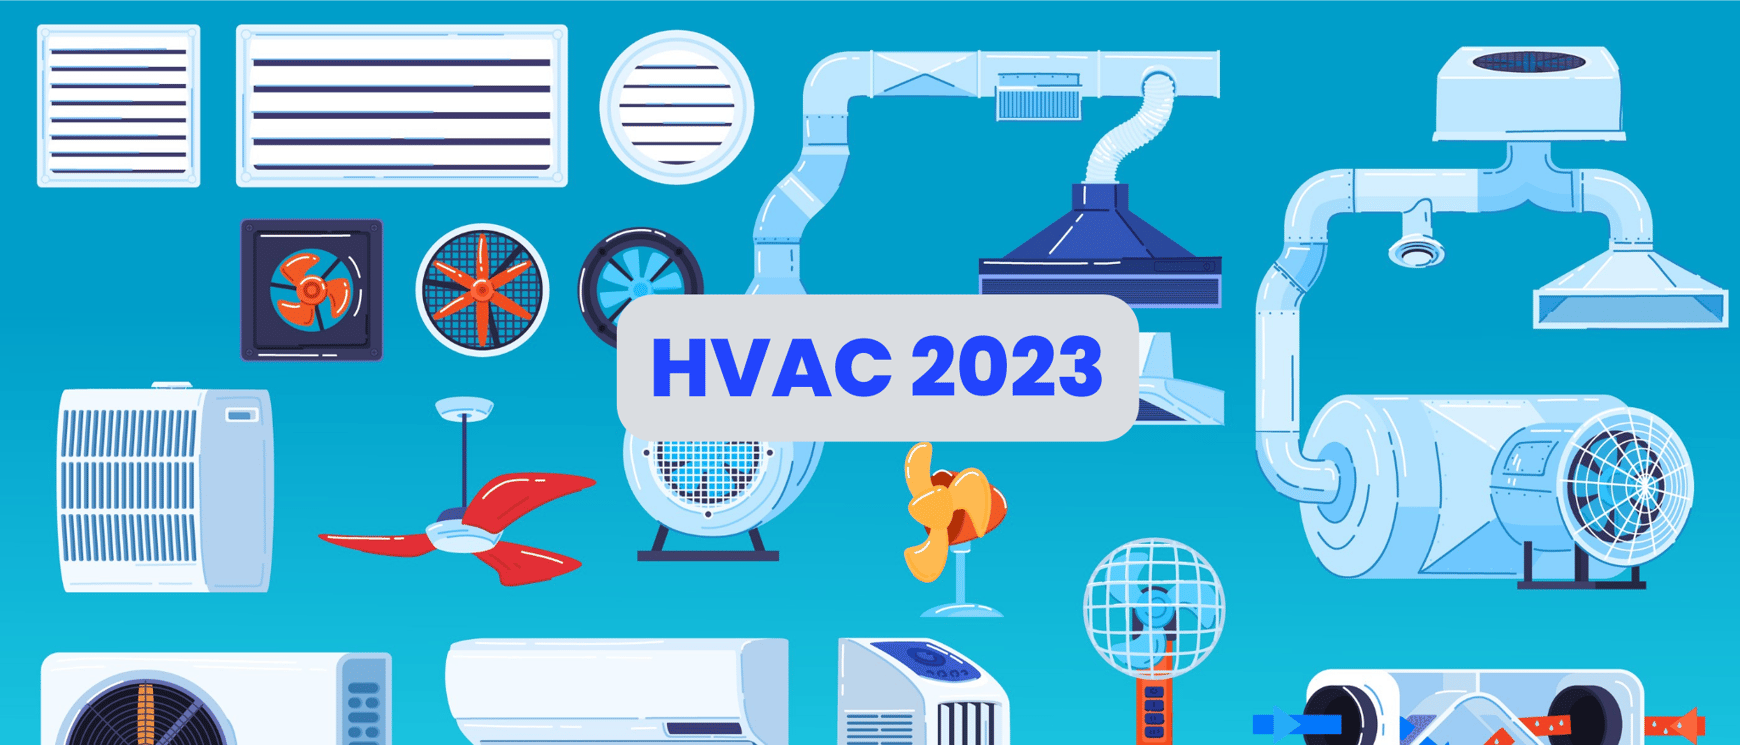 2023 HVAC Regulations Create Challenges & Opportunities for HVAC